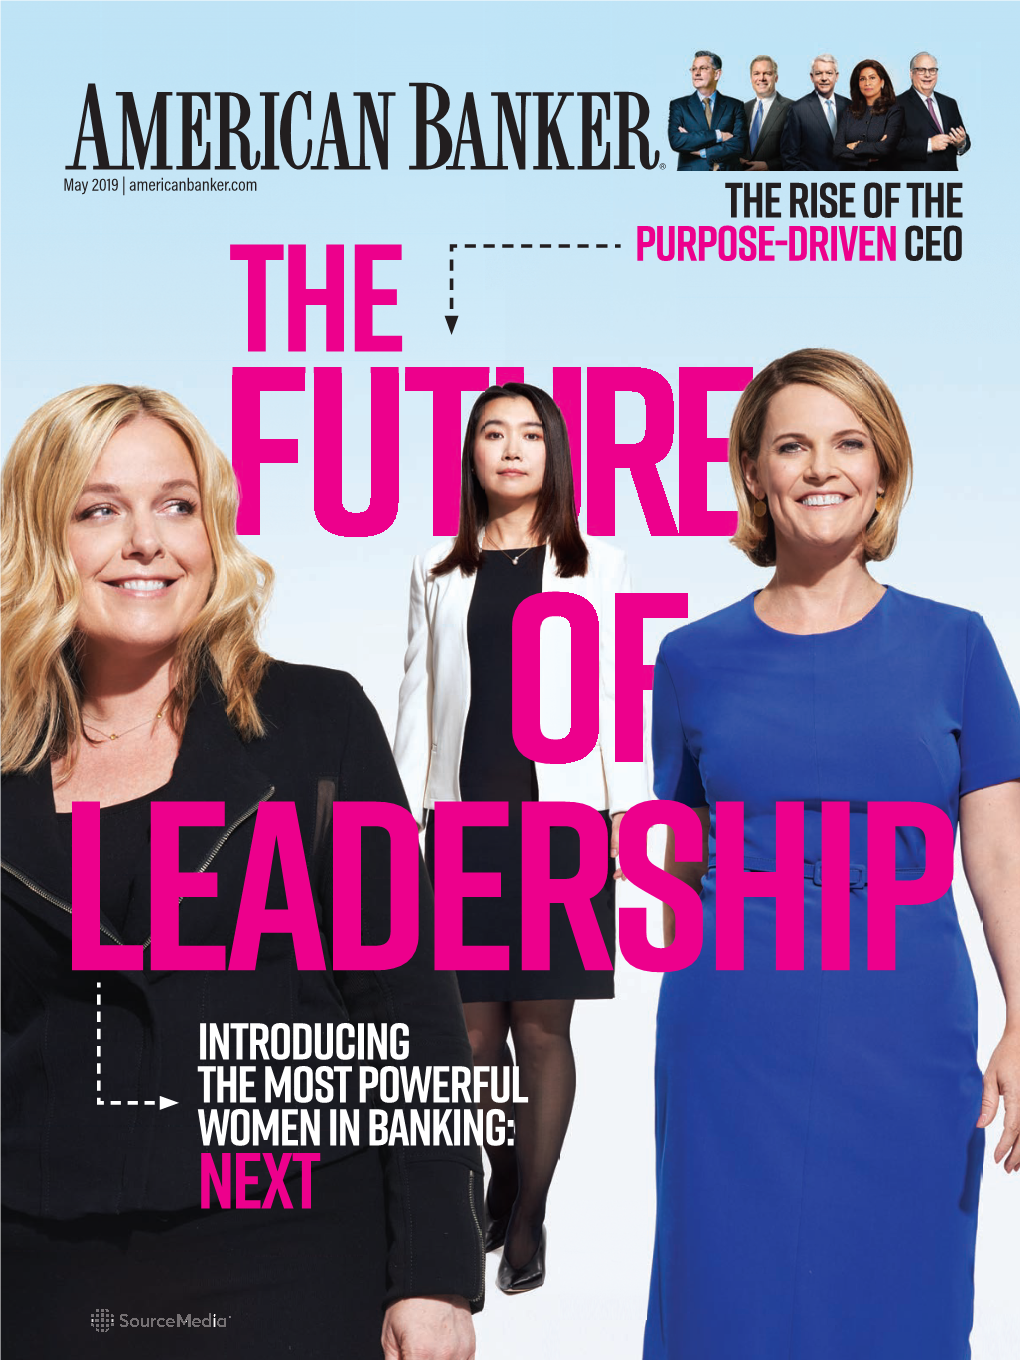 Introducing the Most Powerful Women in Banking: NEXT